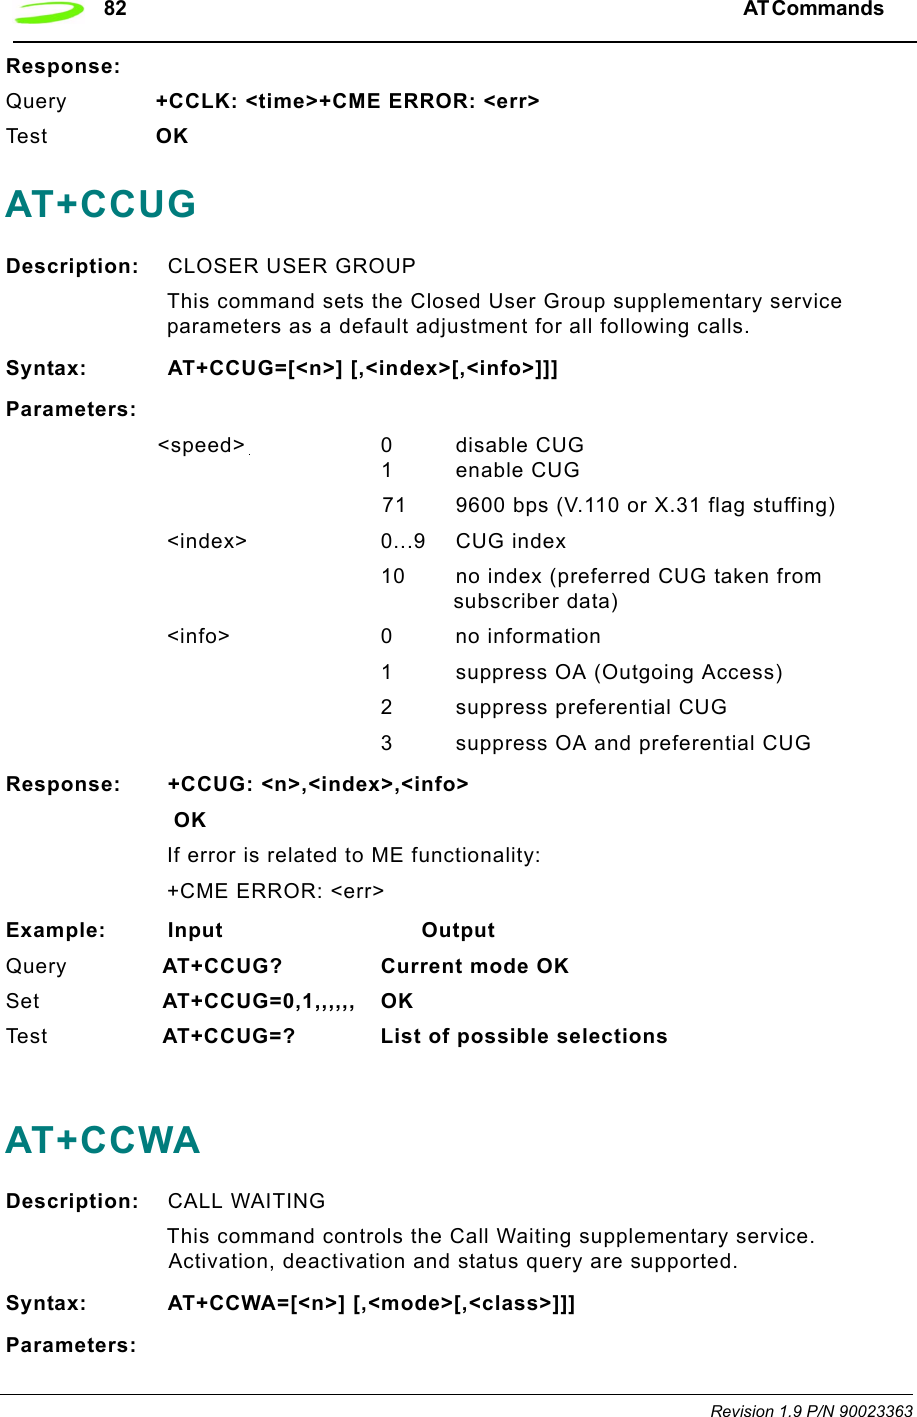 82 AT Commands  Revision 1.9 P/N 90023363Response:Query +CCLK: &lt;time&gt;+CME ERROR: &lt;err&gt;Te s t   OKAT+CCUGDescription: CLOSER USER GROUP This command sets the Closed User Group supplementary service parameters as a default adjustment for all following calls.Syntax: AT+CCUG=[&lt;n&gt;] [,&lt;index&gt;[,&lt;info&gt;]]]Parameters:&lt;speed&gt; 0disable CUG1 enable CUG71 9600 bps (V.110 or X.31 flag stuffing)&lt;index&gt; 0...9 CUG index10 no index (preferred CUG taken from subscriber data)&lt;info&gt; 0 no information1 suppress OA (Outgoing Access)2 suppress preferential CUG3 suppress OA and preferential CUGResponse: +CCUG: &lt;n&gt;,&lt;index&gt;,&lt;info&gt; OKIf error is related to ME functionality:+CME ERROR: &lt;err&gt;Example: Input                            OutputQuery  AT+CCUG? Current mode OKSet  AT+CCUG=0,1,,,,,, OKTe s t   AT+CCUG=? List of possible selectionsAT+CCWADescription: CALL WAITINGThis command controls the Call Waiting supplementary service. Activation, deactivation and status query are supported.Syntax: AT+CCWA=[&lt;n&gt;] [,&lt;mode&gt;[,&lt;class&gt;]]]Parameters: